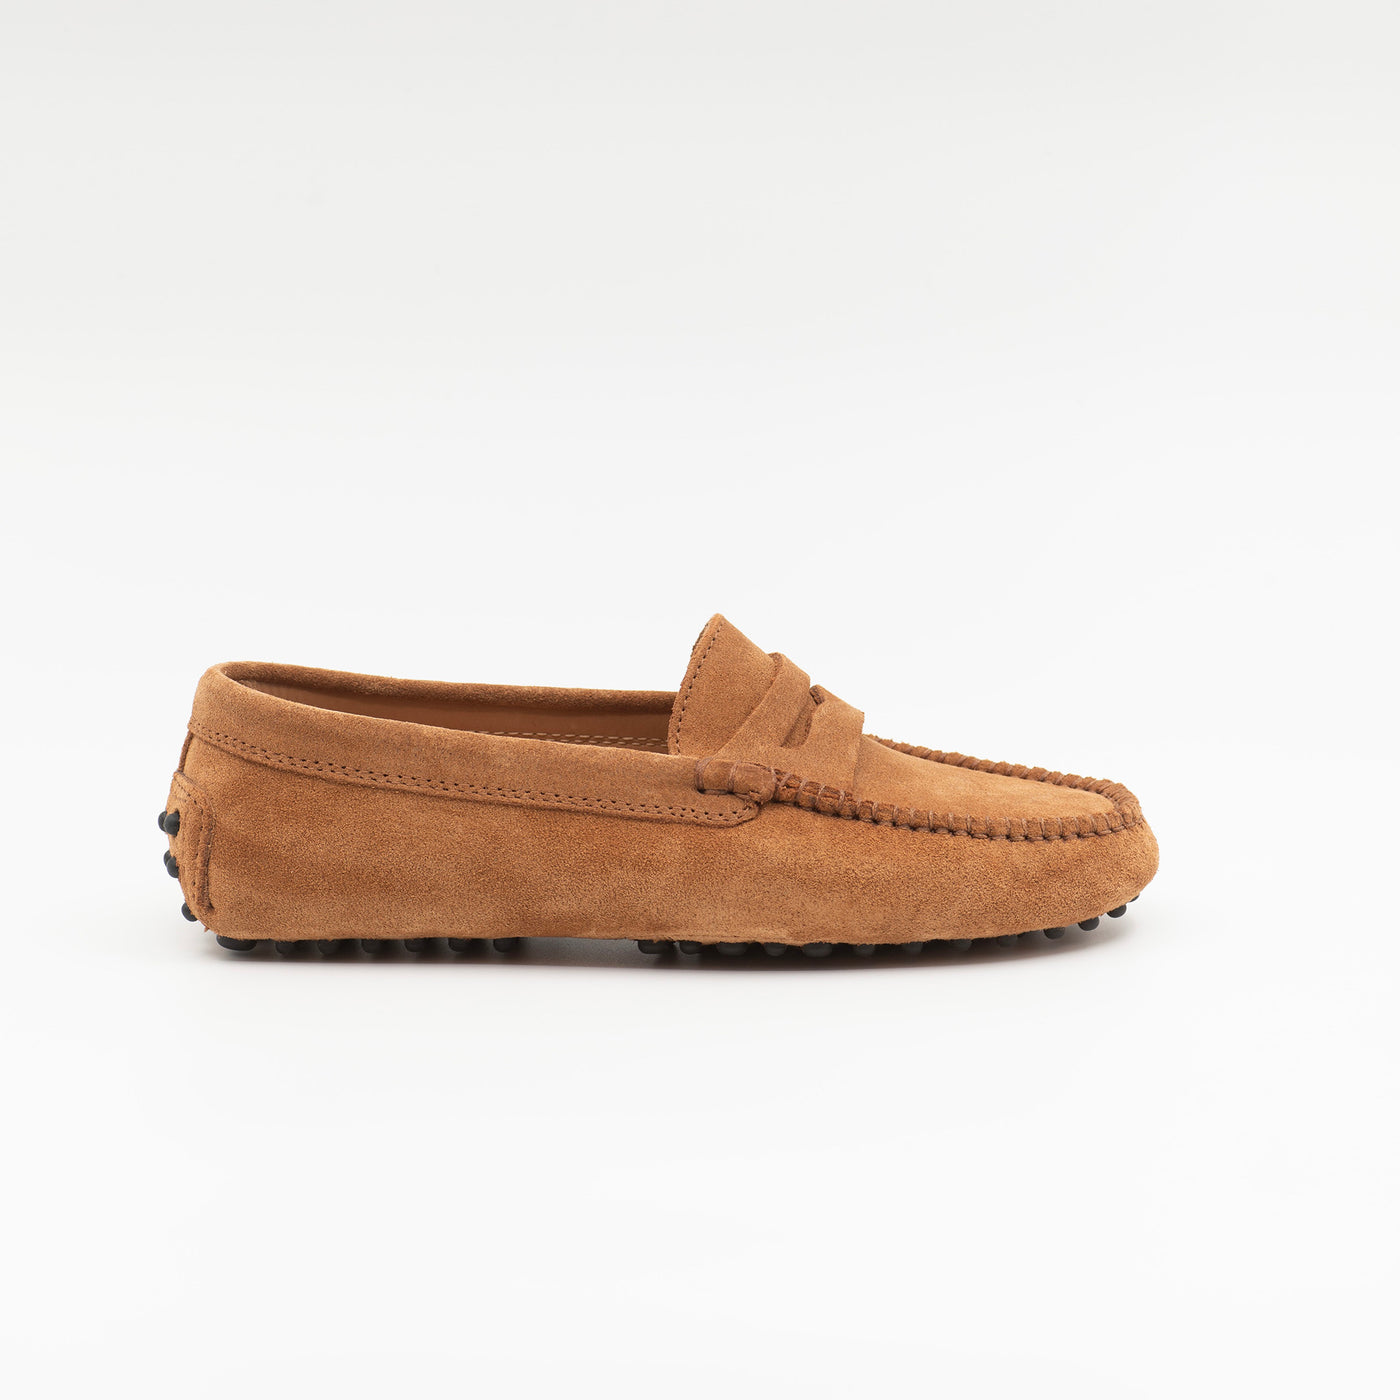 Gommino loafer in cognac suede. 